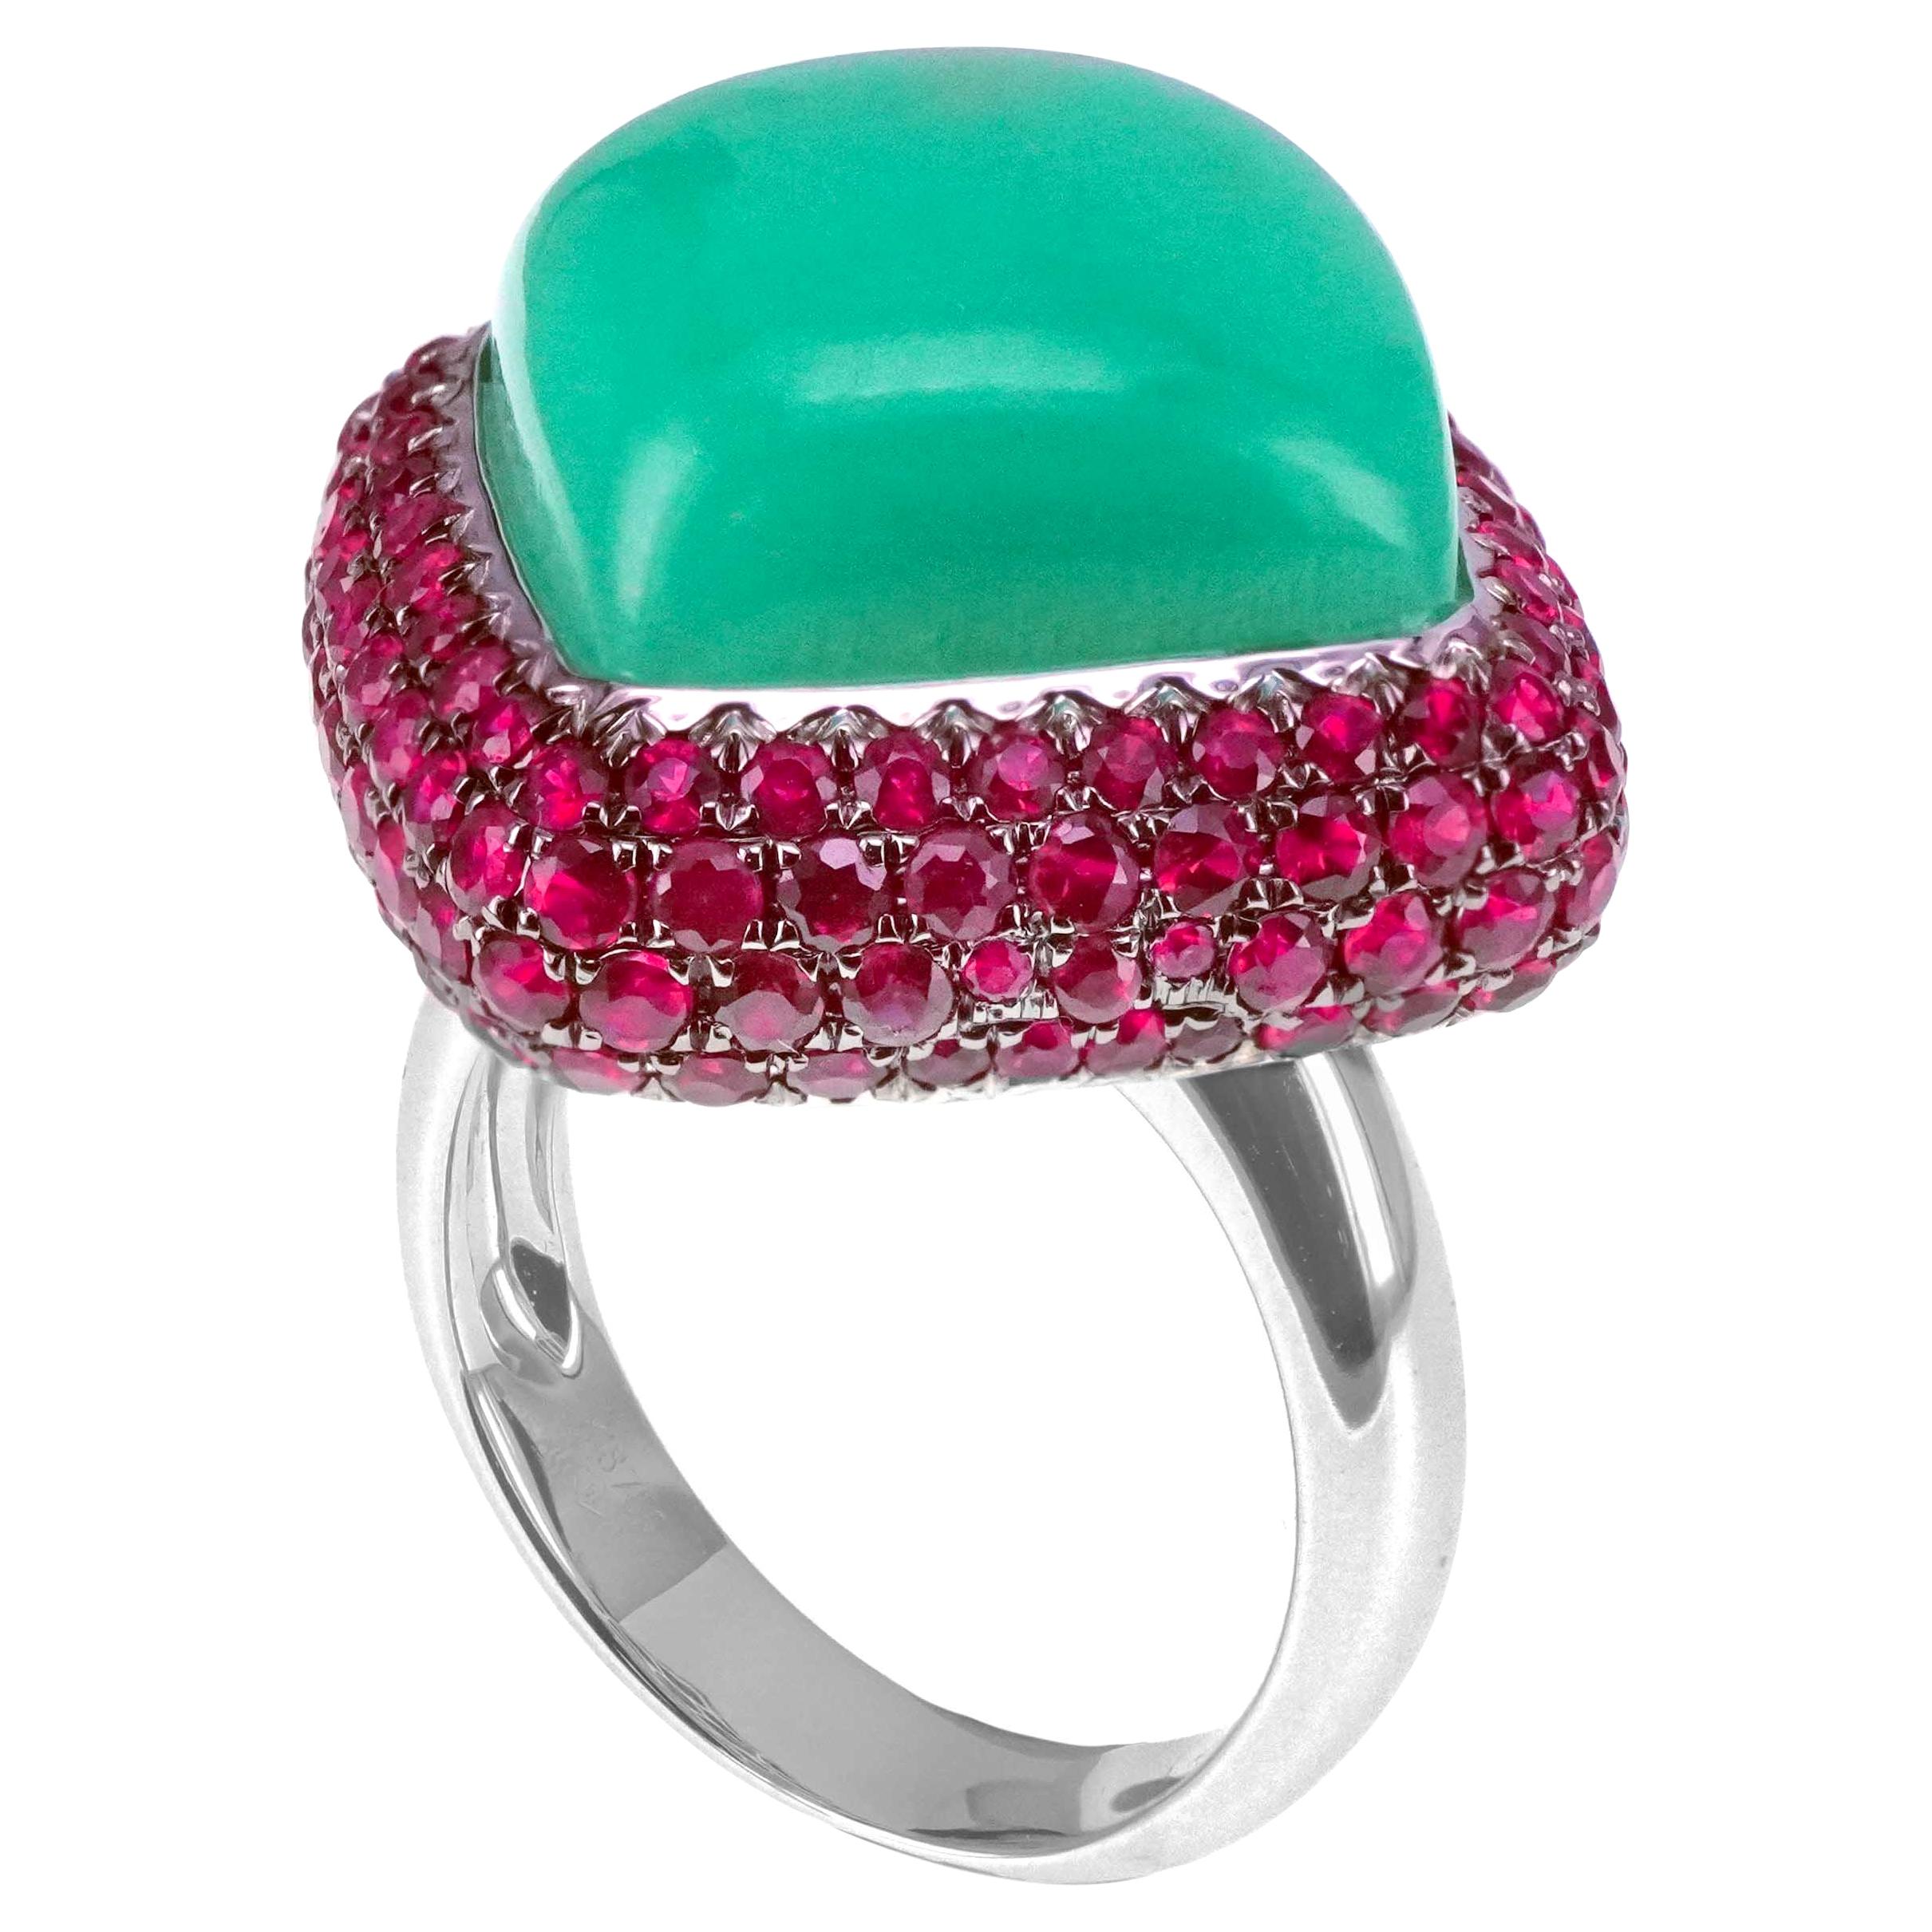 15.35 Carat Chrysoprase & 2.98 Carat Vivid Red Burma Ruby Unique Table Top Ring For Sale